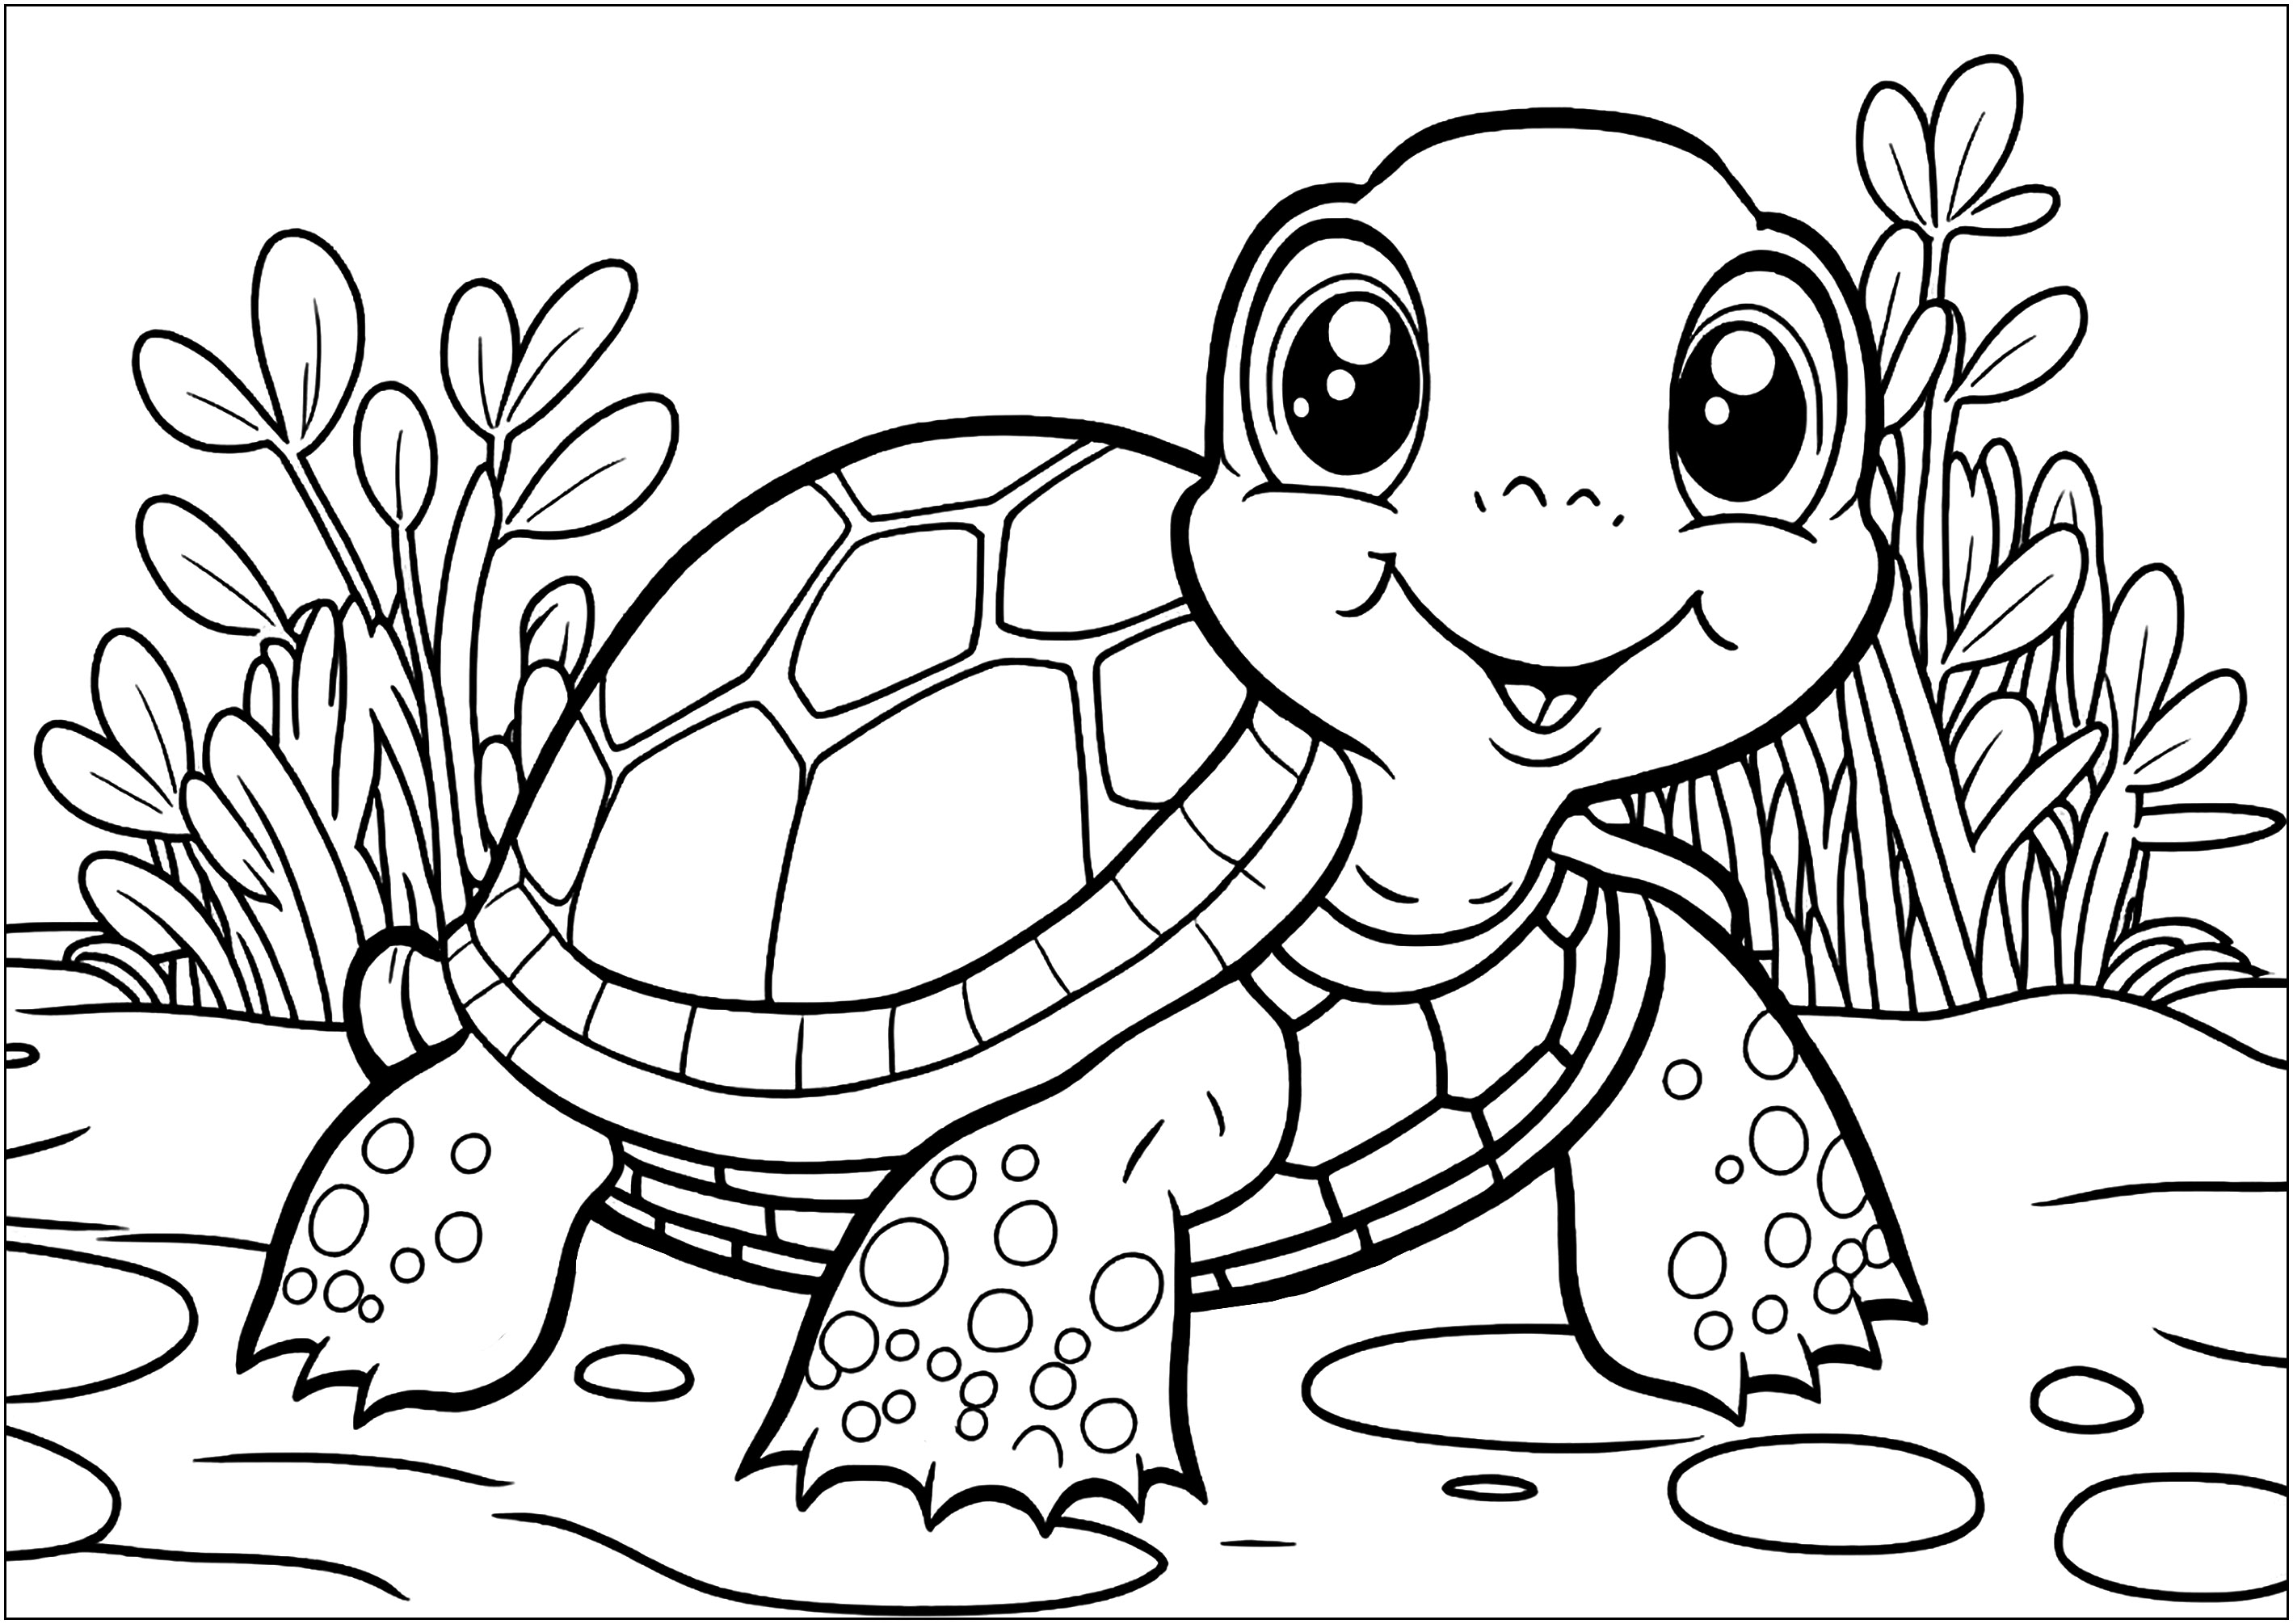 Smiling turtle - Turtles Kids Coloring Pages - Page page/